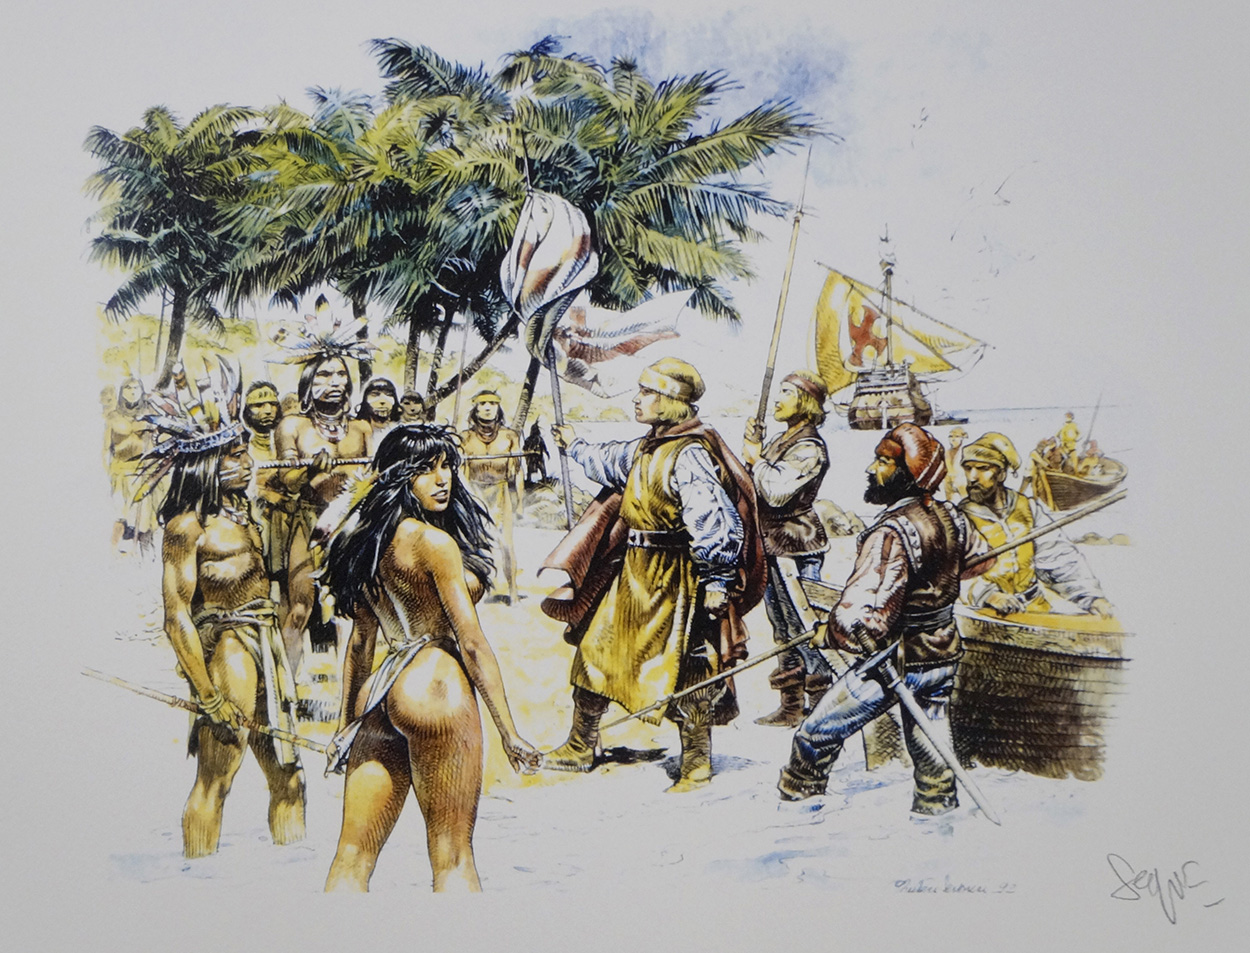 Natives and Invaders (Limited Edition Print) (Signed) art by Paolo Serpieri at The Illustration Art Gallery